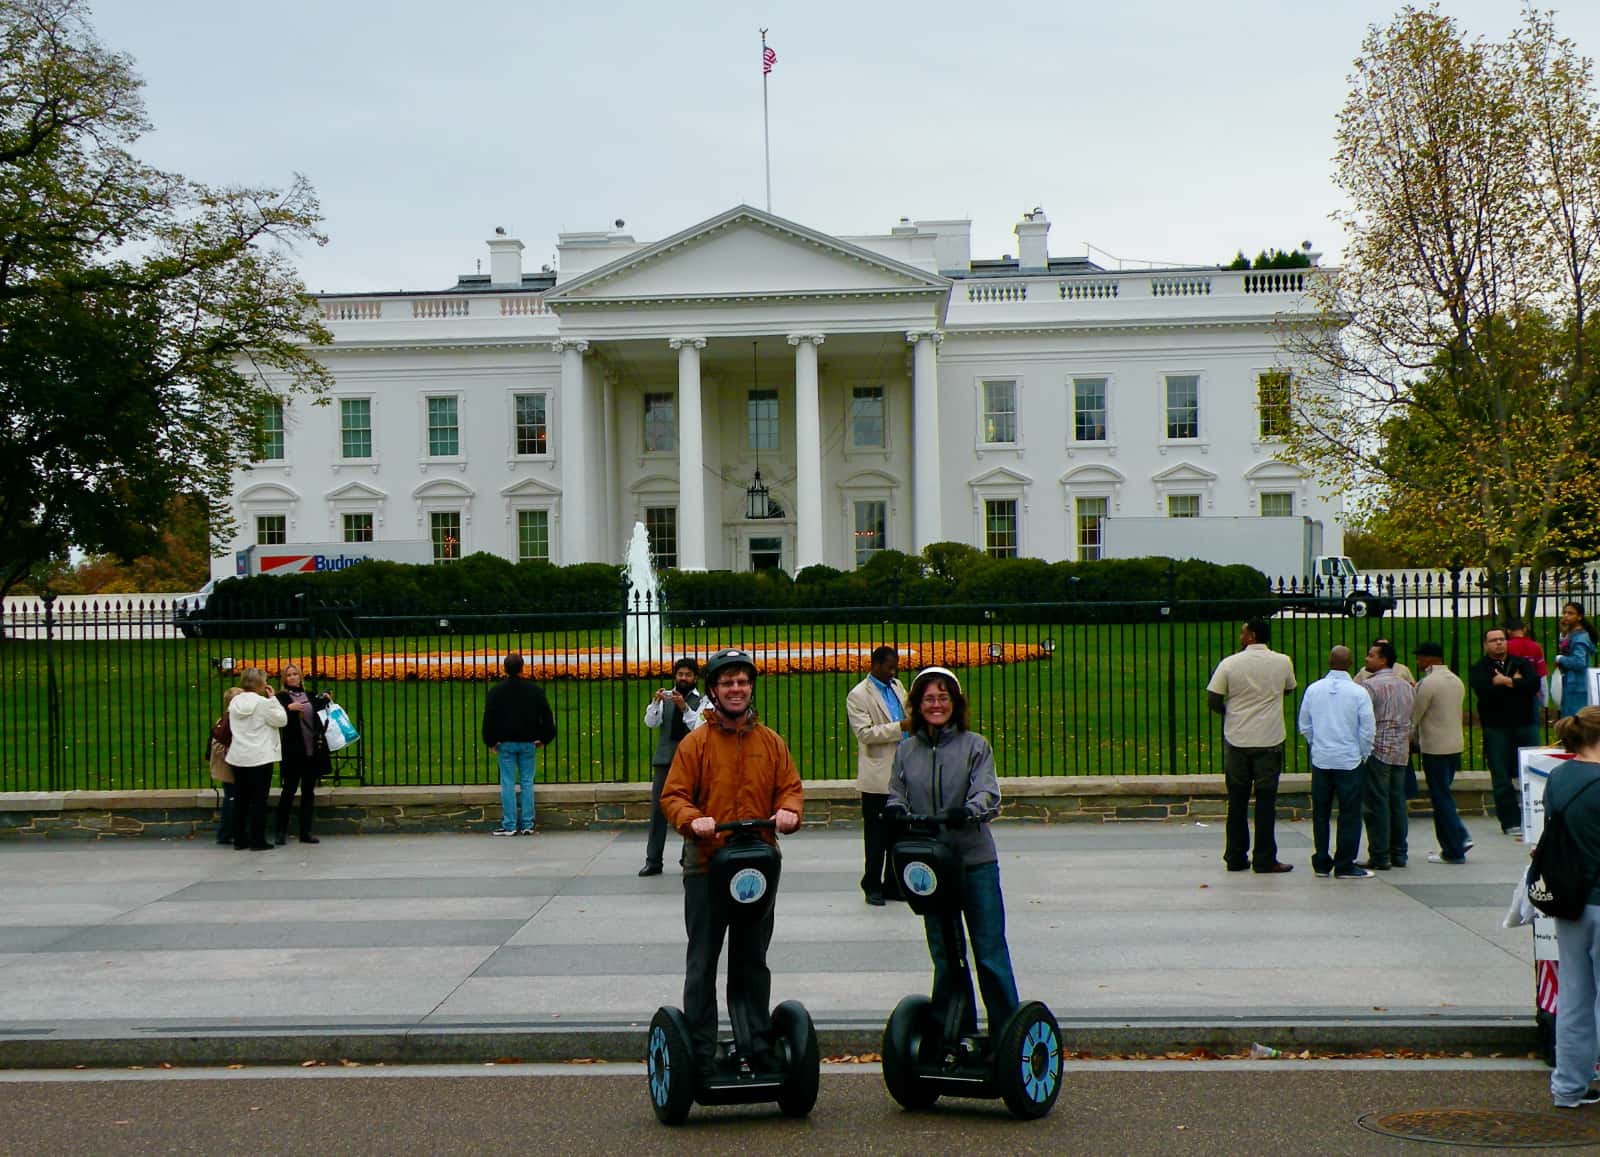 Man and woman riding segways in front of US White House